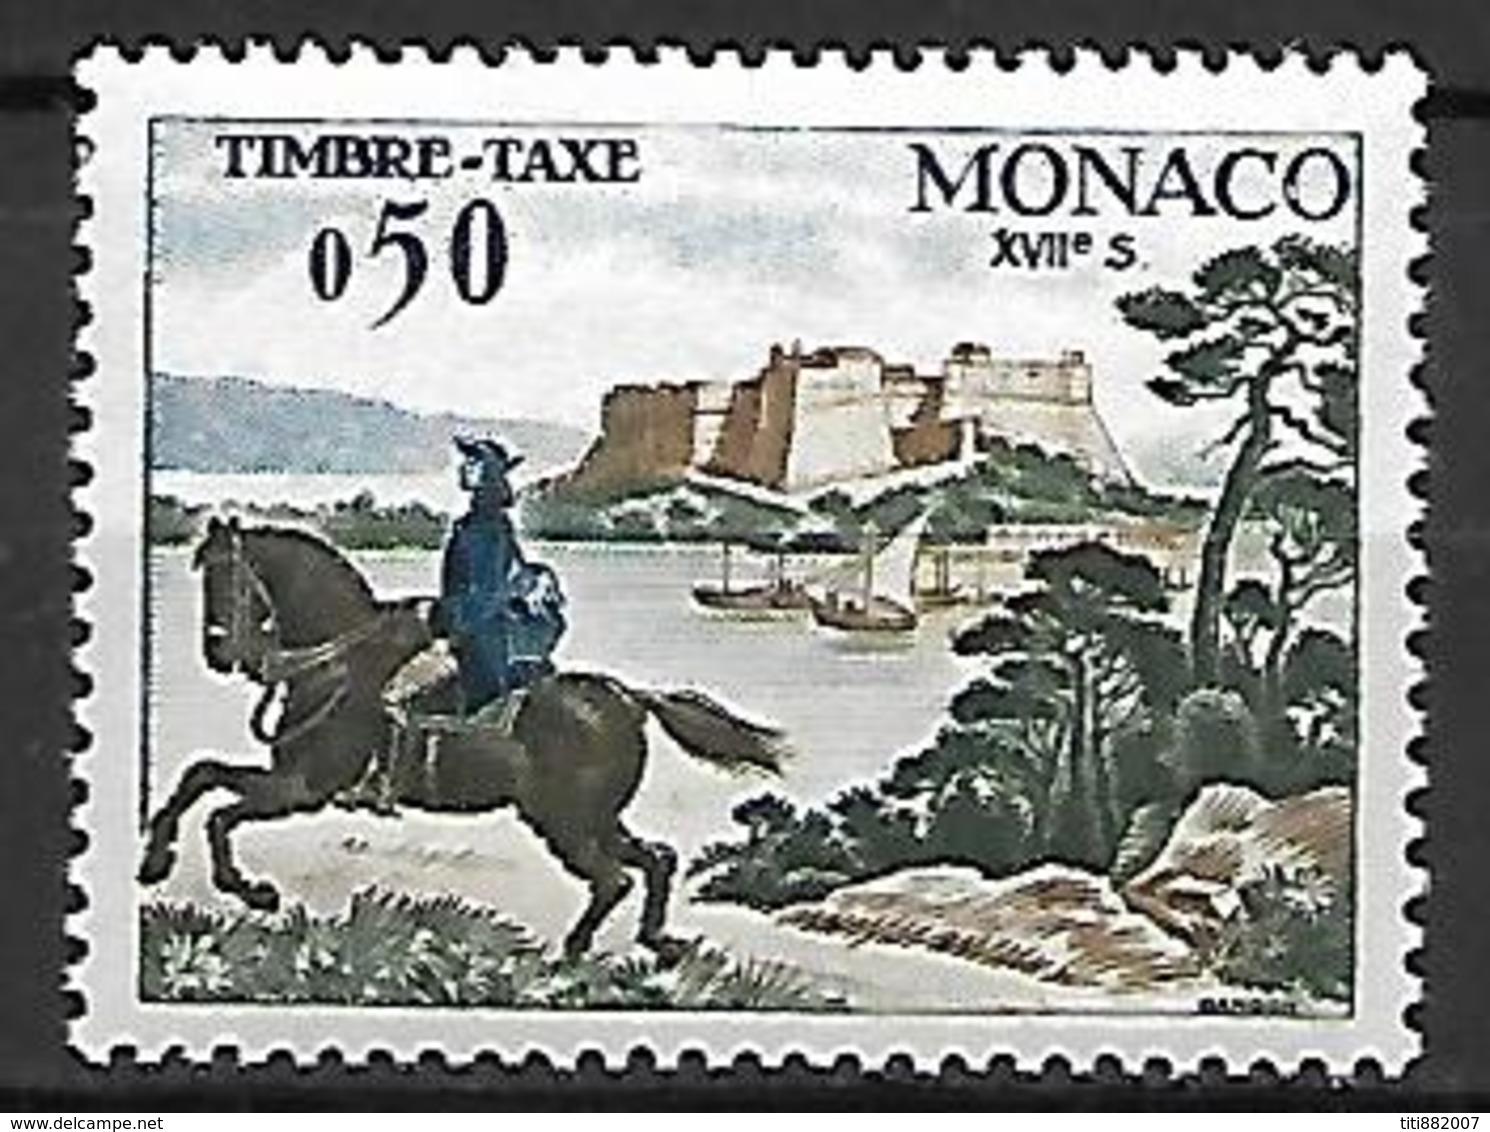 MONACO    -   Timbre-Taxe  -  1960.   Y&T N° 61 ** .  Messager à Cheval - Postage Due